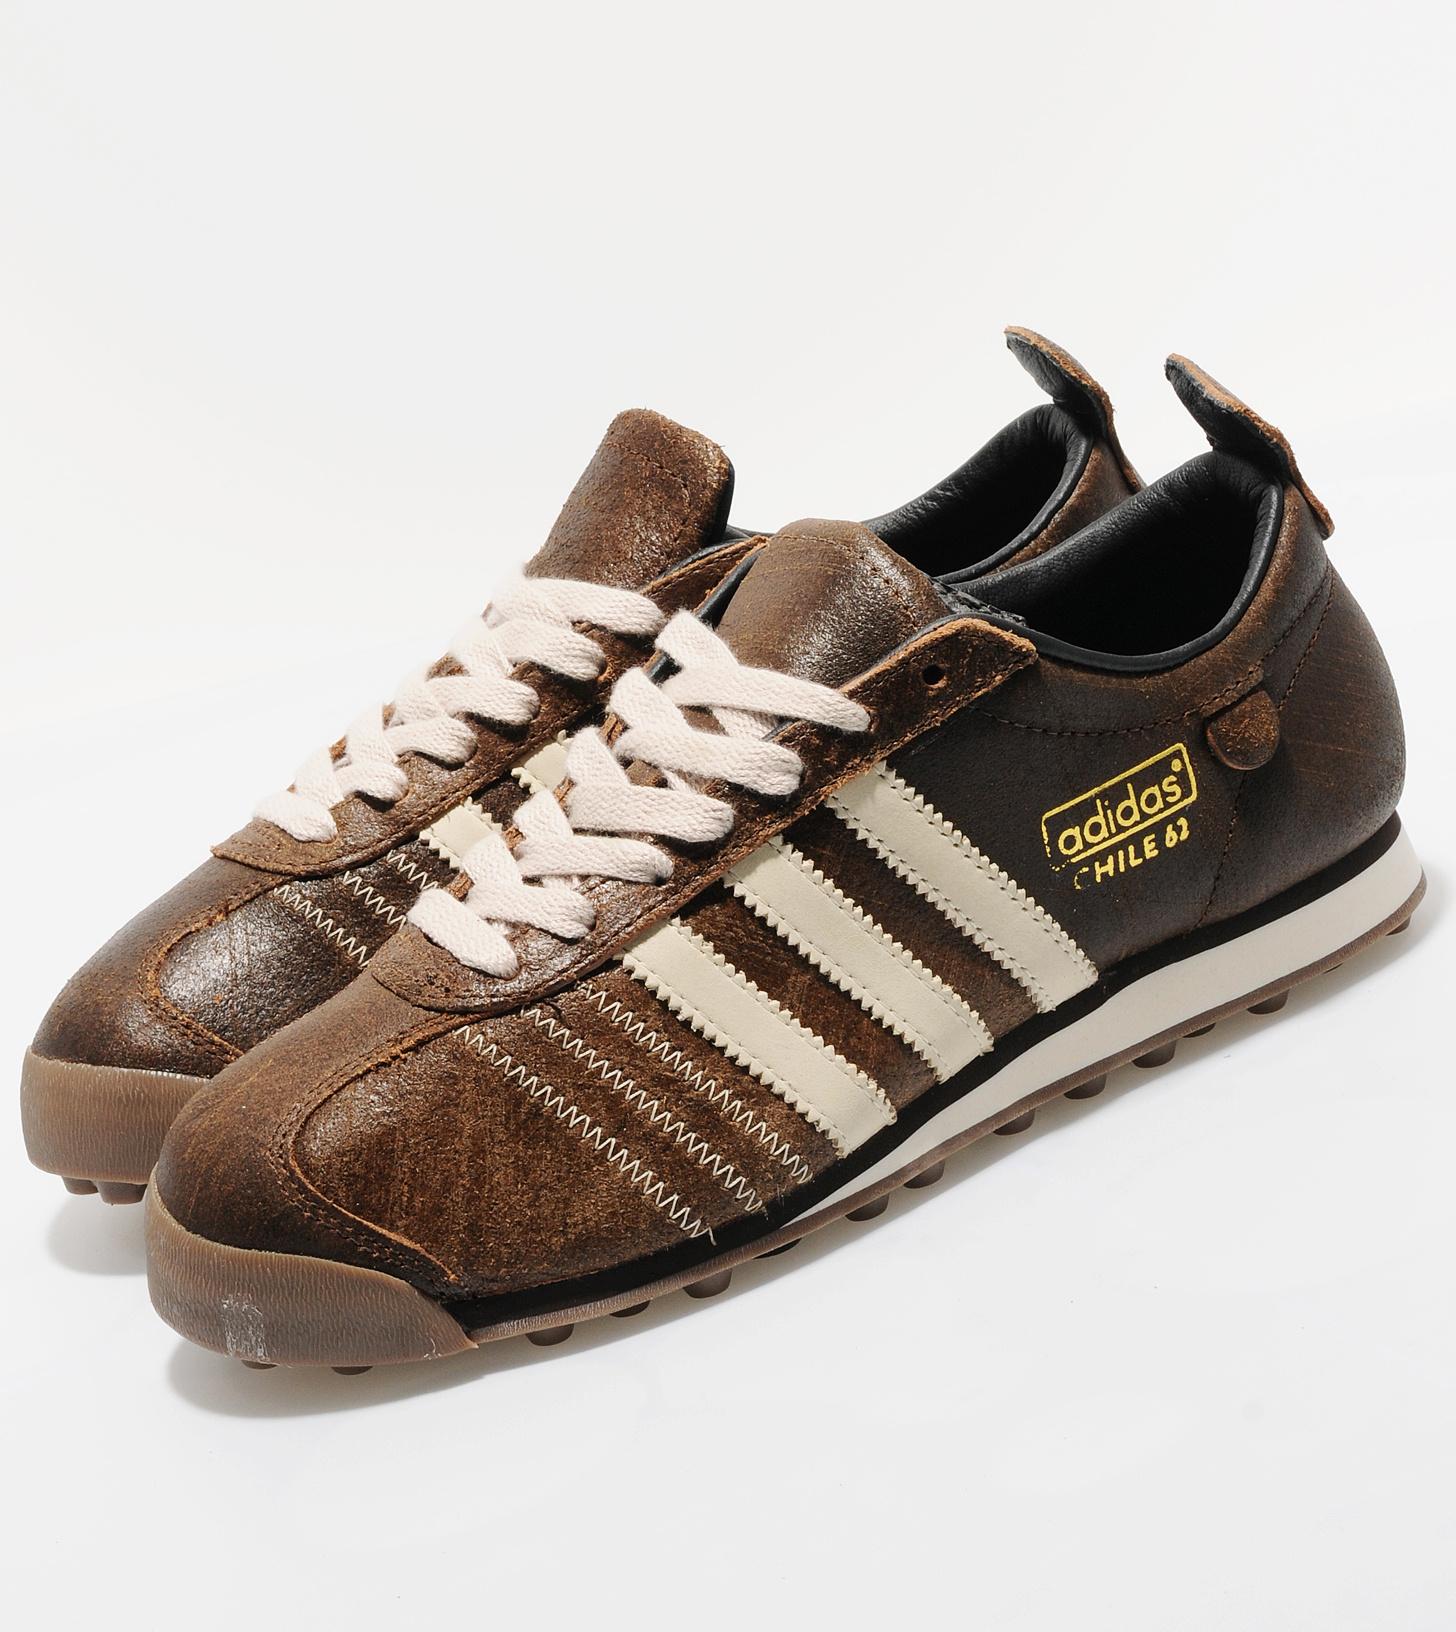 adidas chile 62 brown